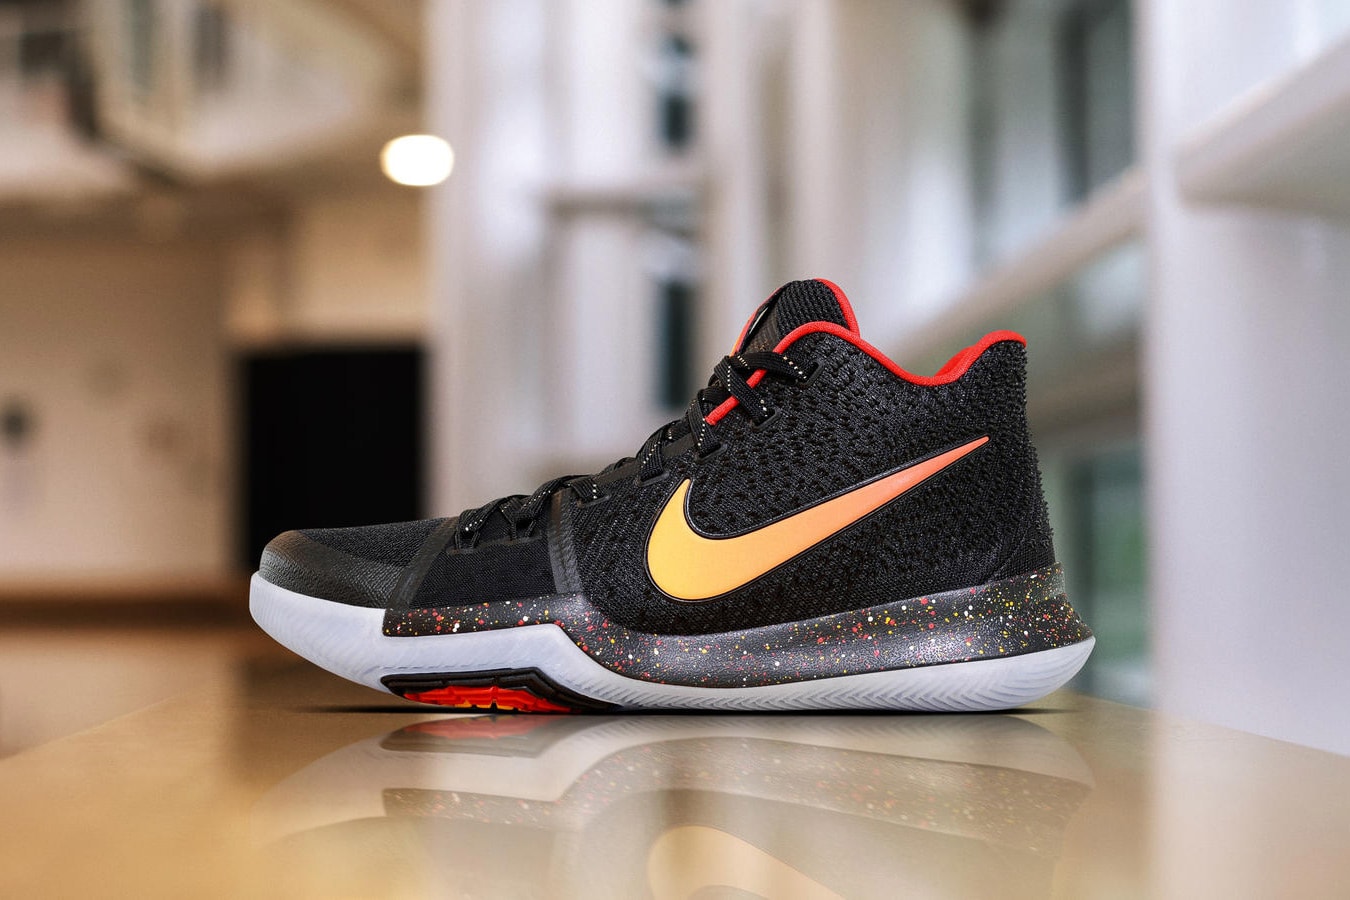 Nike Kyrie 3 PE Helps Uncle Drew Stand Out | Hypebeast